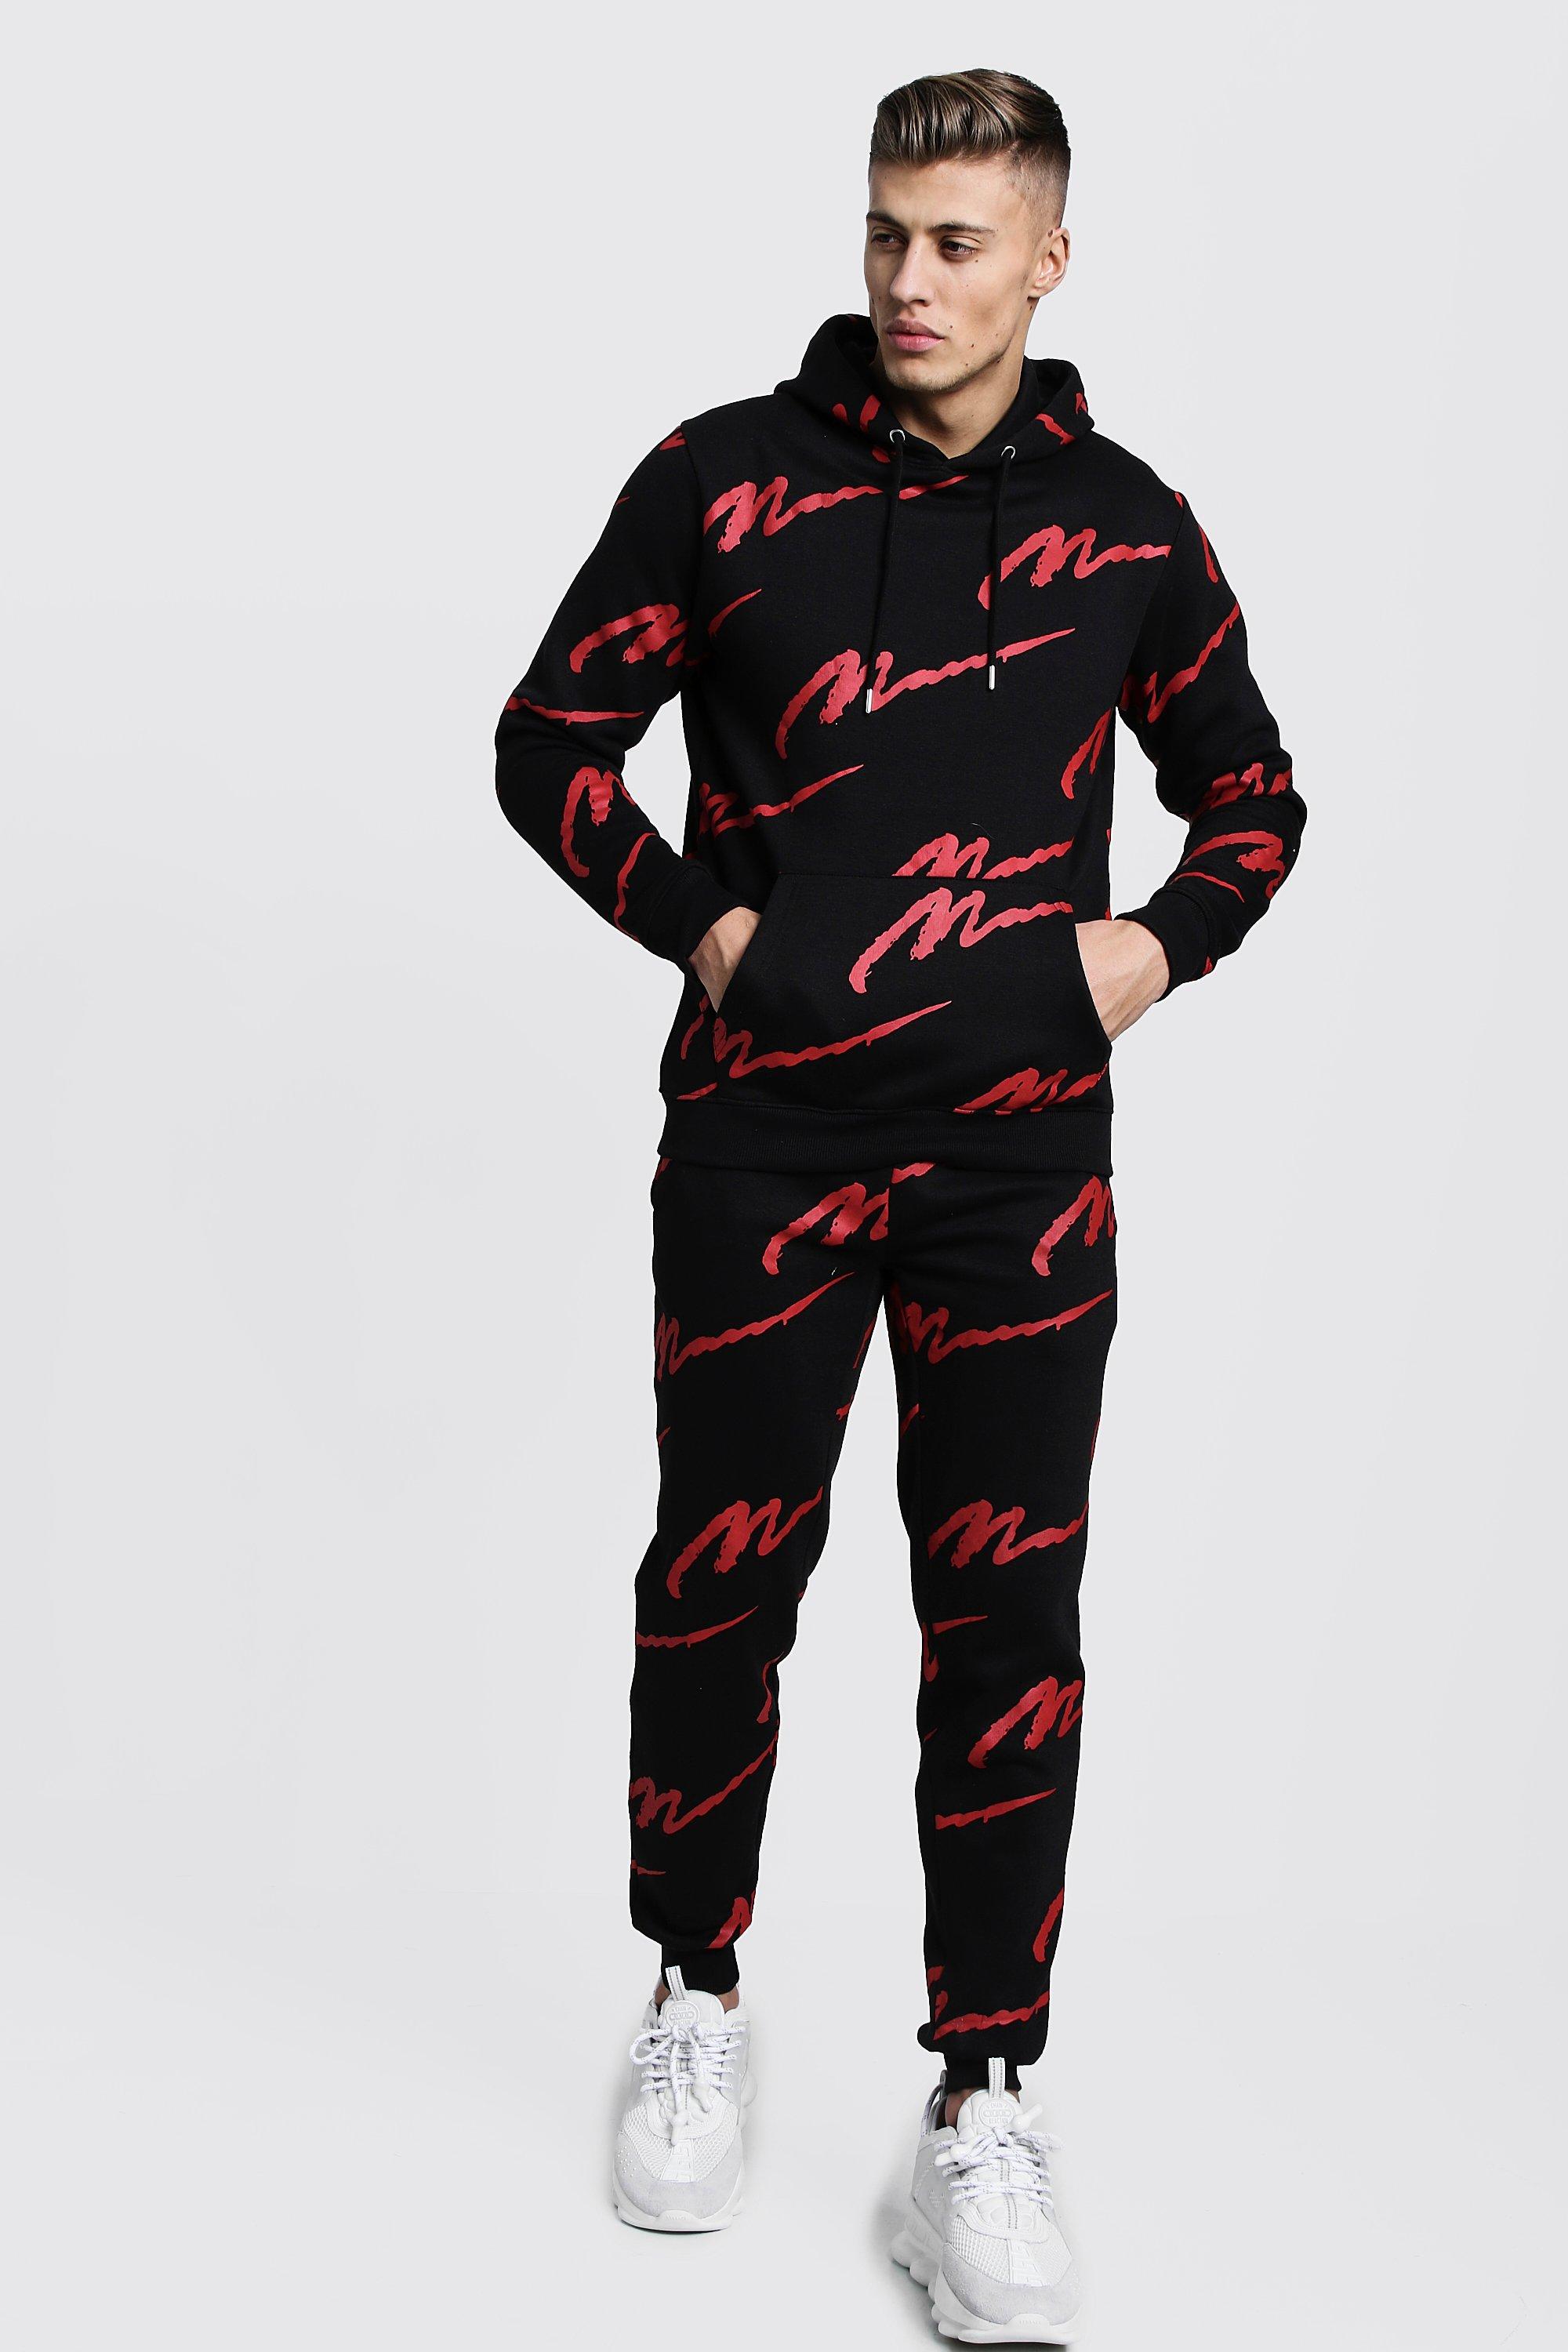 All Over Red MAN Print Hooded Tracksuit - boohooMAN